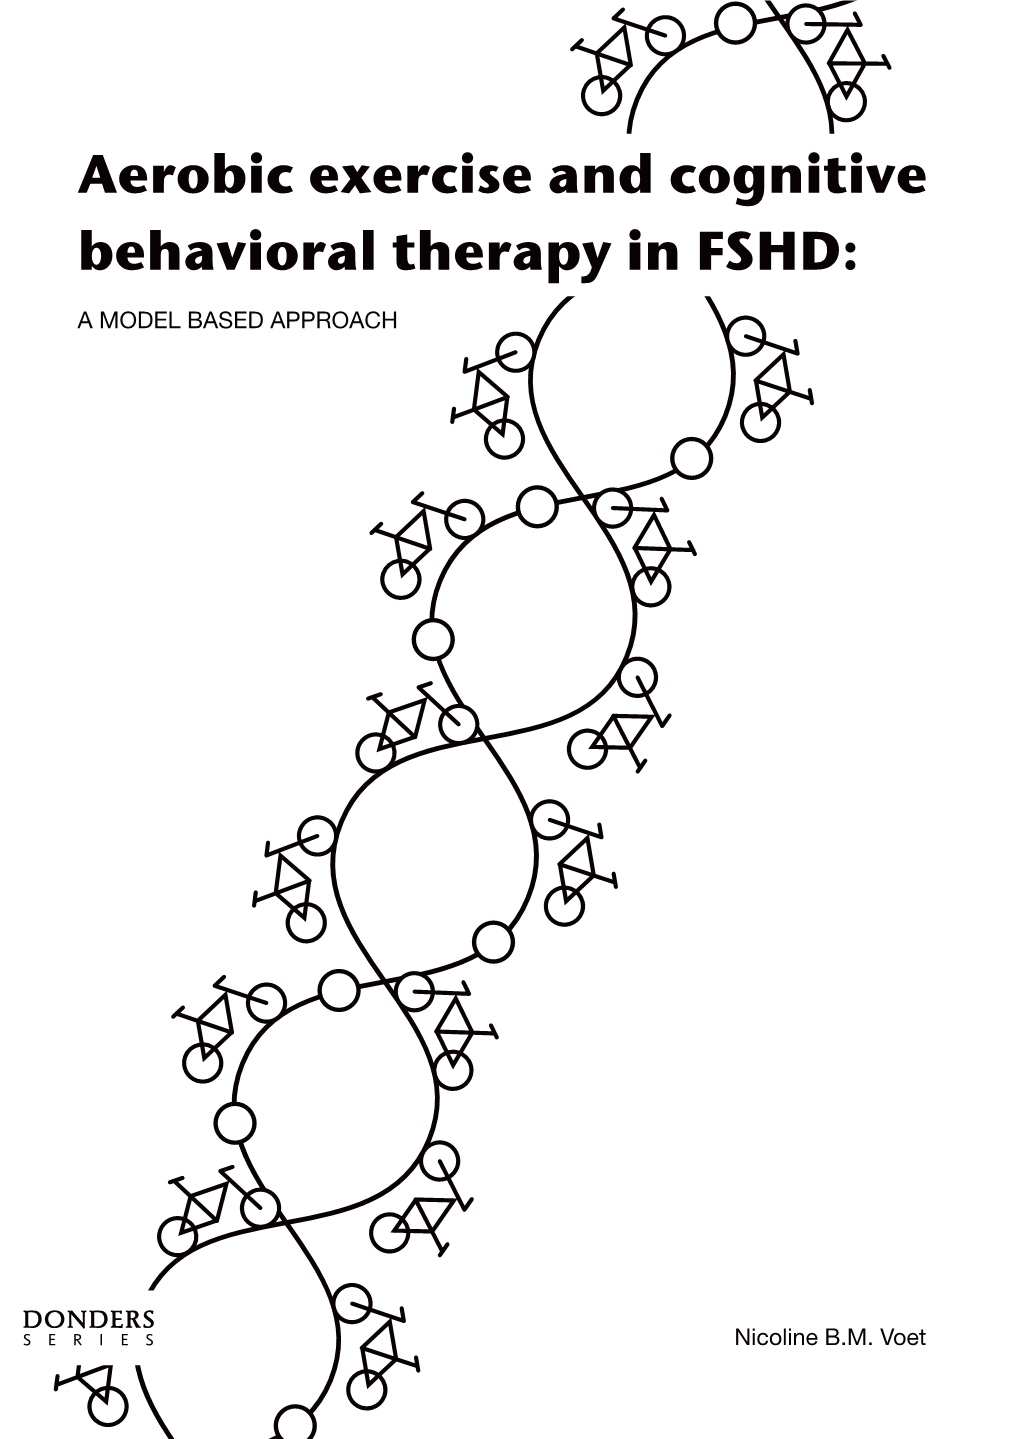 Aerobic Exercise and Cognitive Behavioral Therapy in FSHD